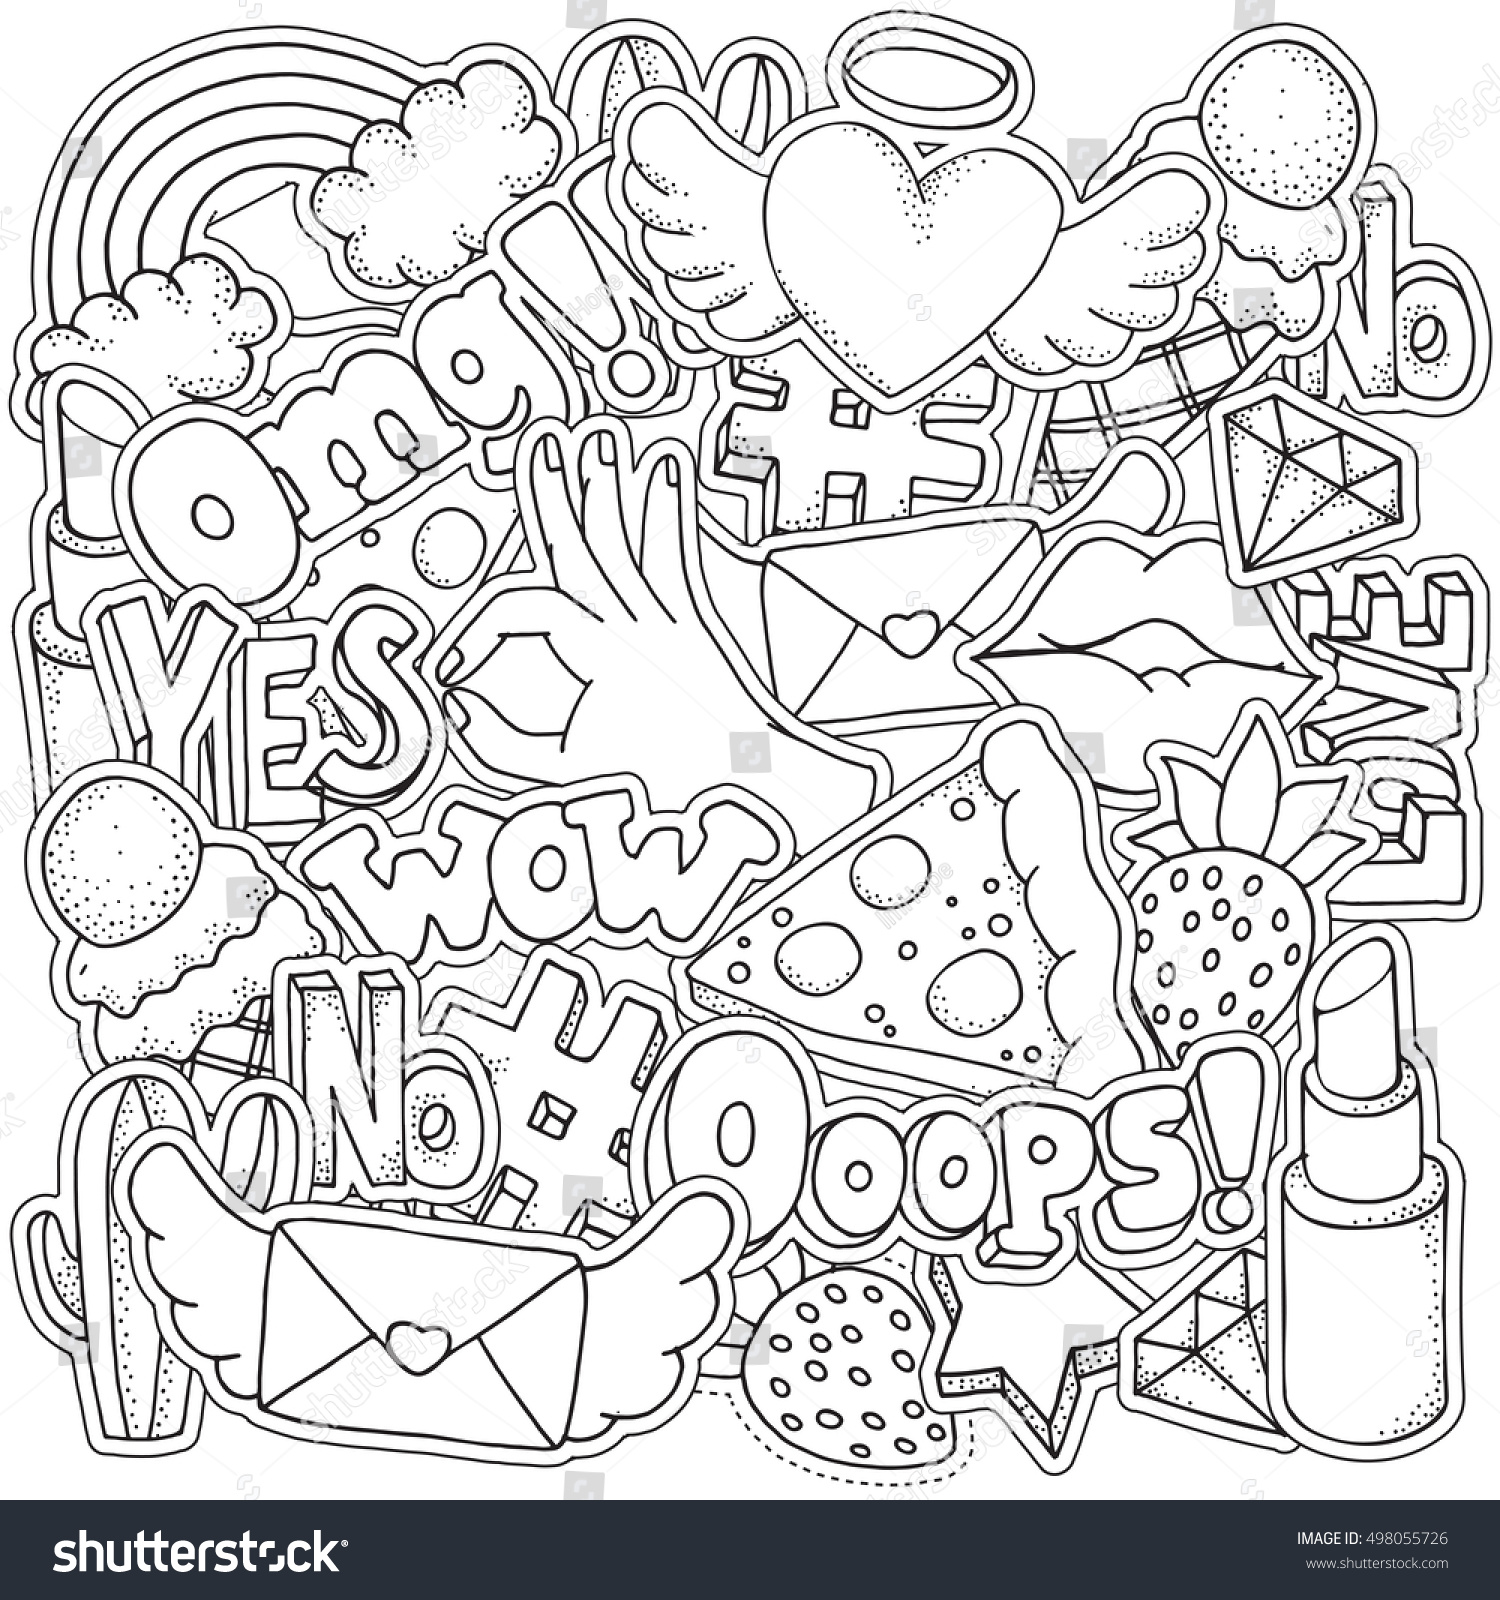 Download Coloring Book Page Adult Fashion Patch Stock Vector 498055726 - Shutterstock